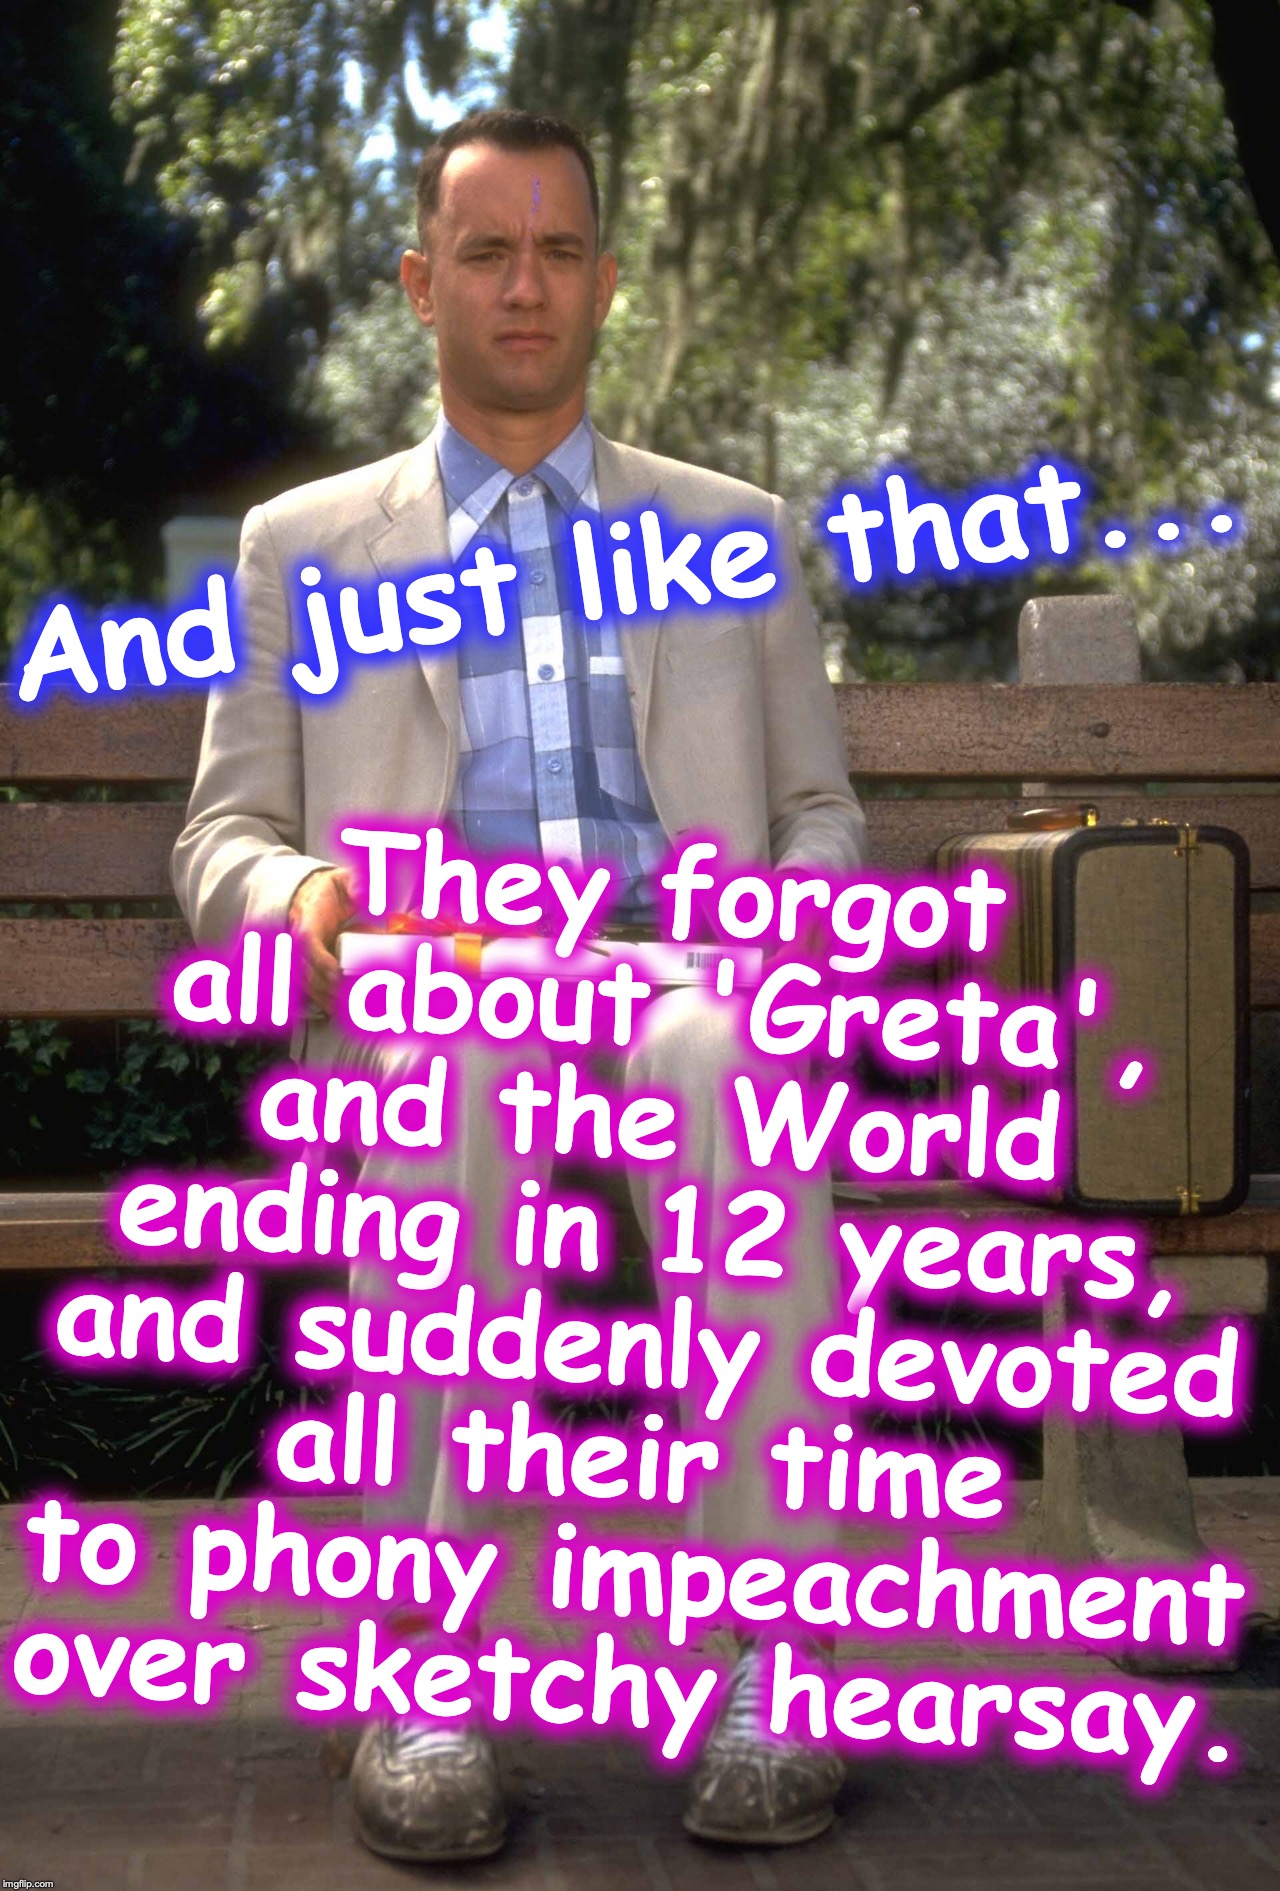 Forrest Gump | They forgot all about 'Greta', and the World ending in 12 years, and suddenly devoted all their time to phony impeachment over sketchy hearsay. And just like that... | image tagged in forrest gump | made w/ Imgflip meme maker